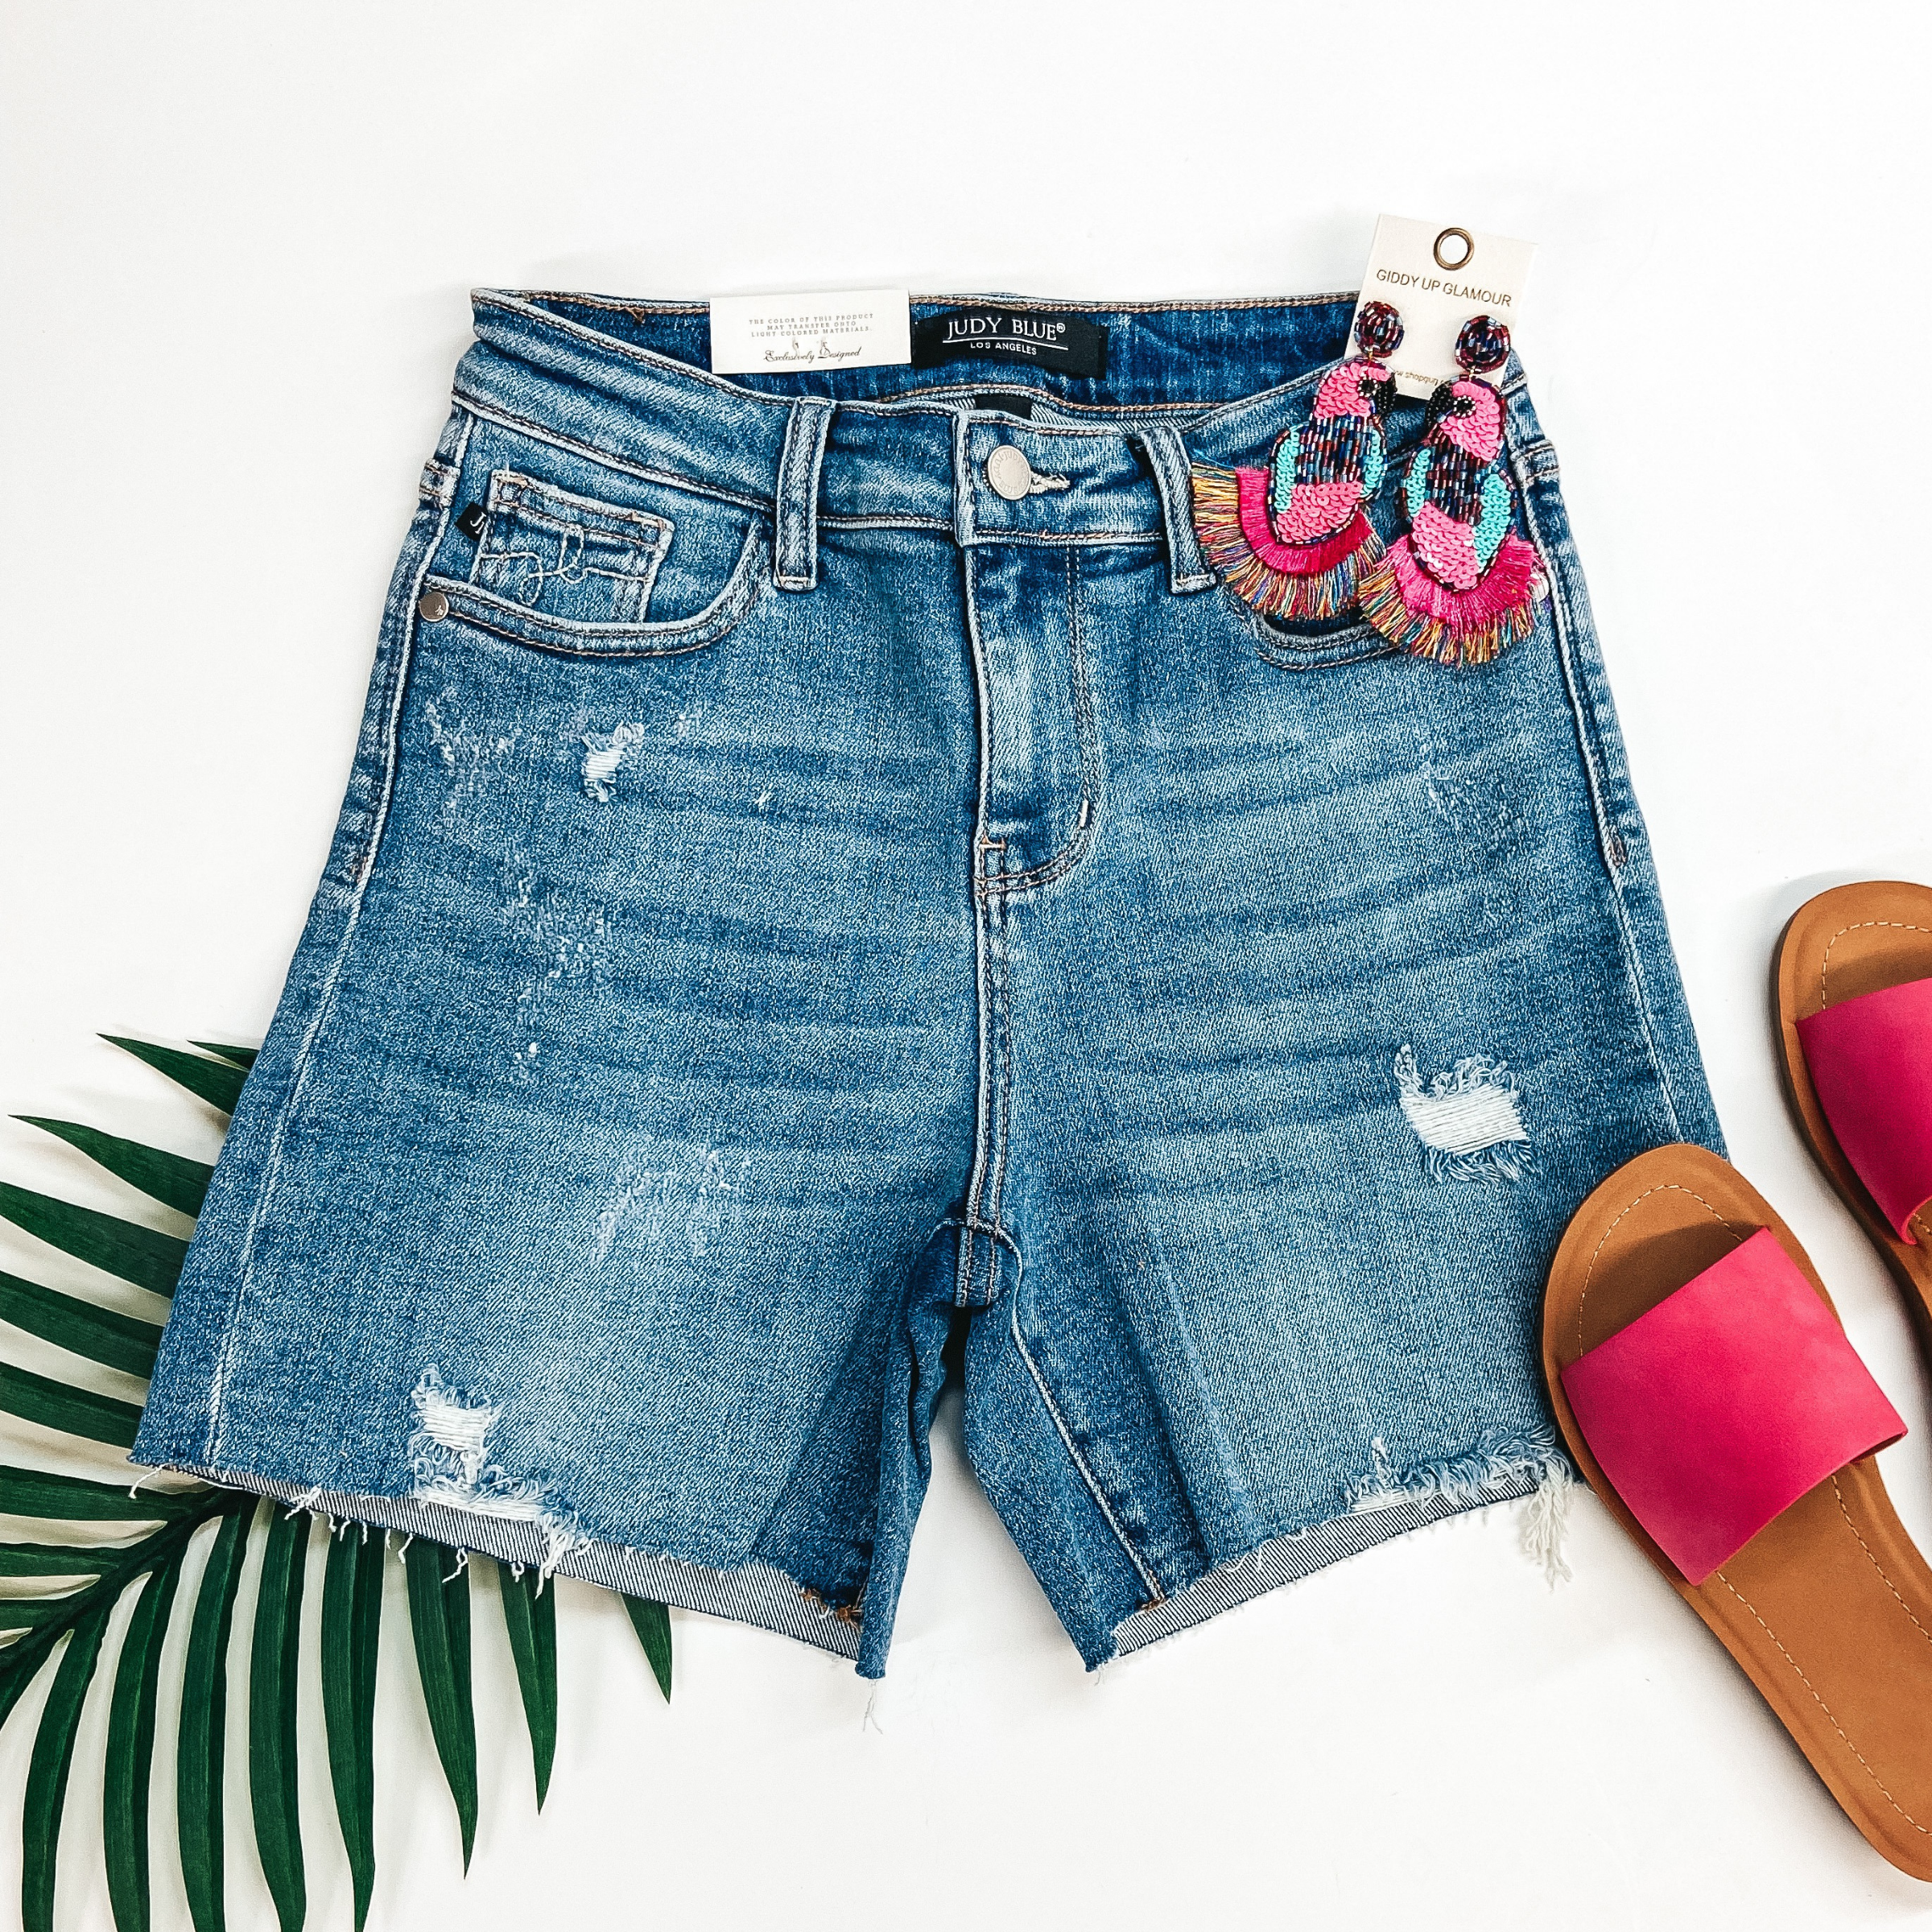 A pair of light wash distressed shorts. These shorts are pictured on a white background with a palm leaf, pink sandals, and beaded earrings.